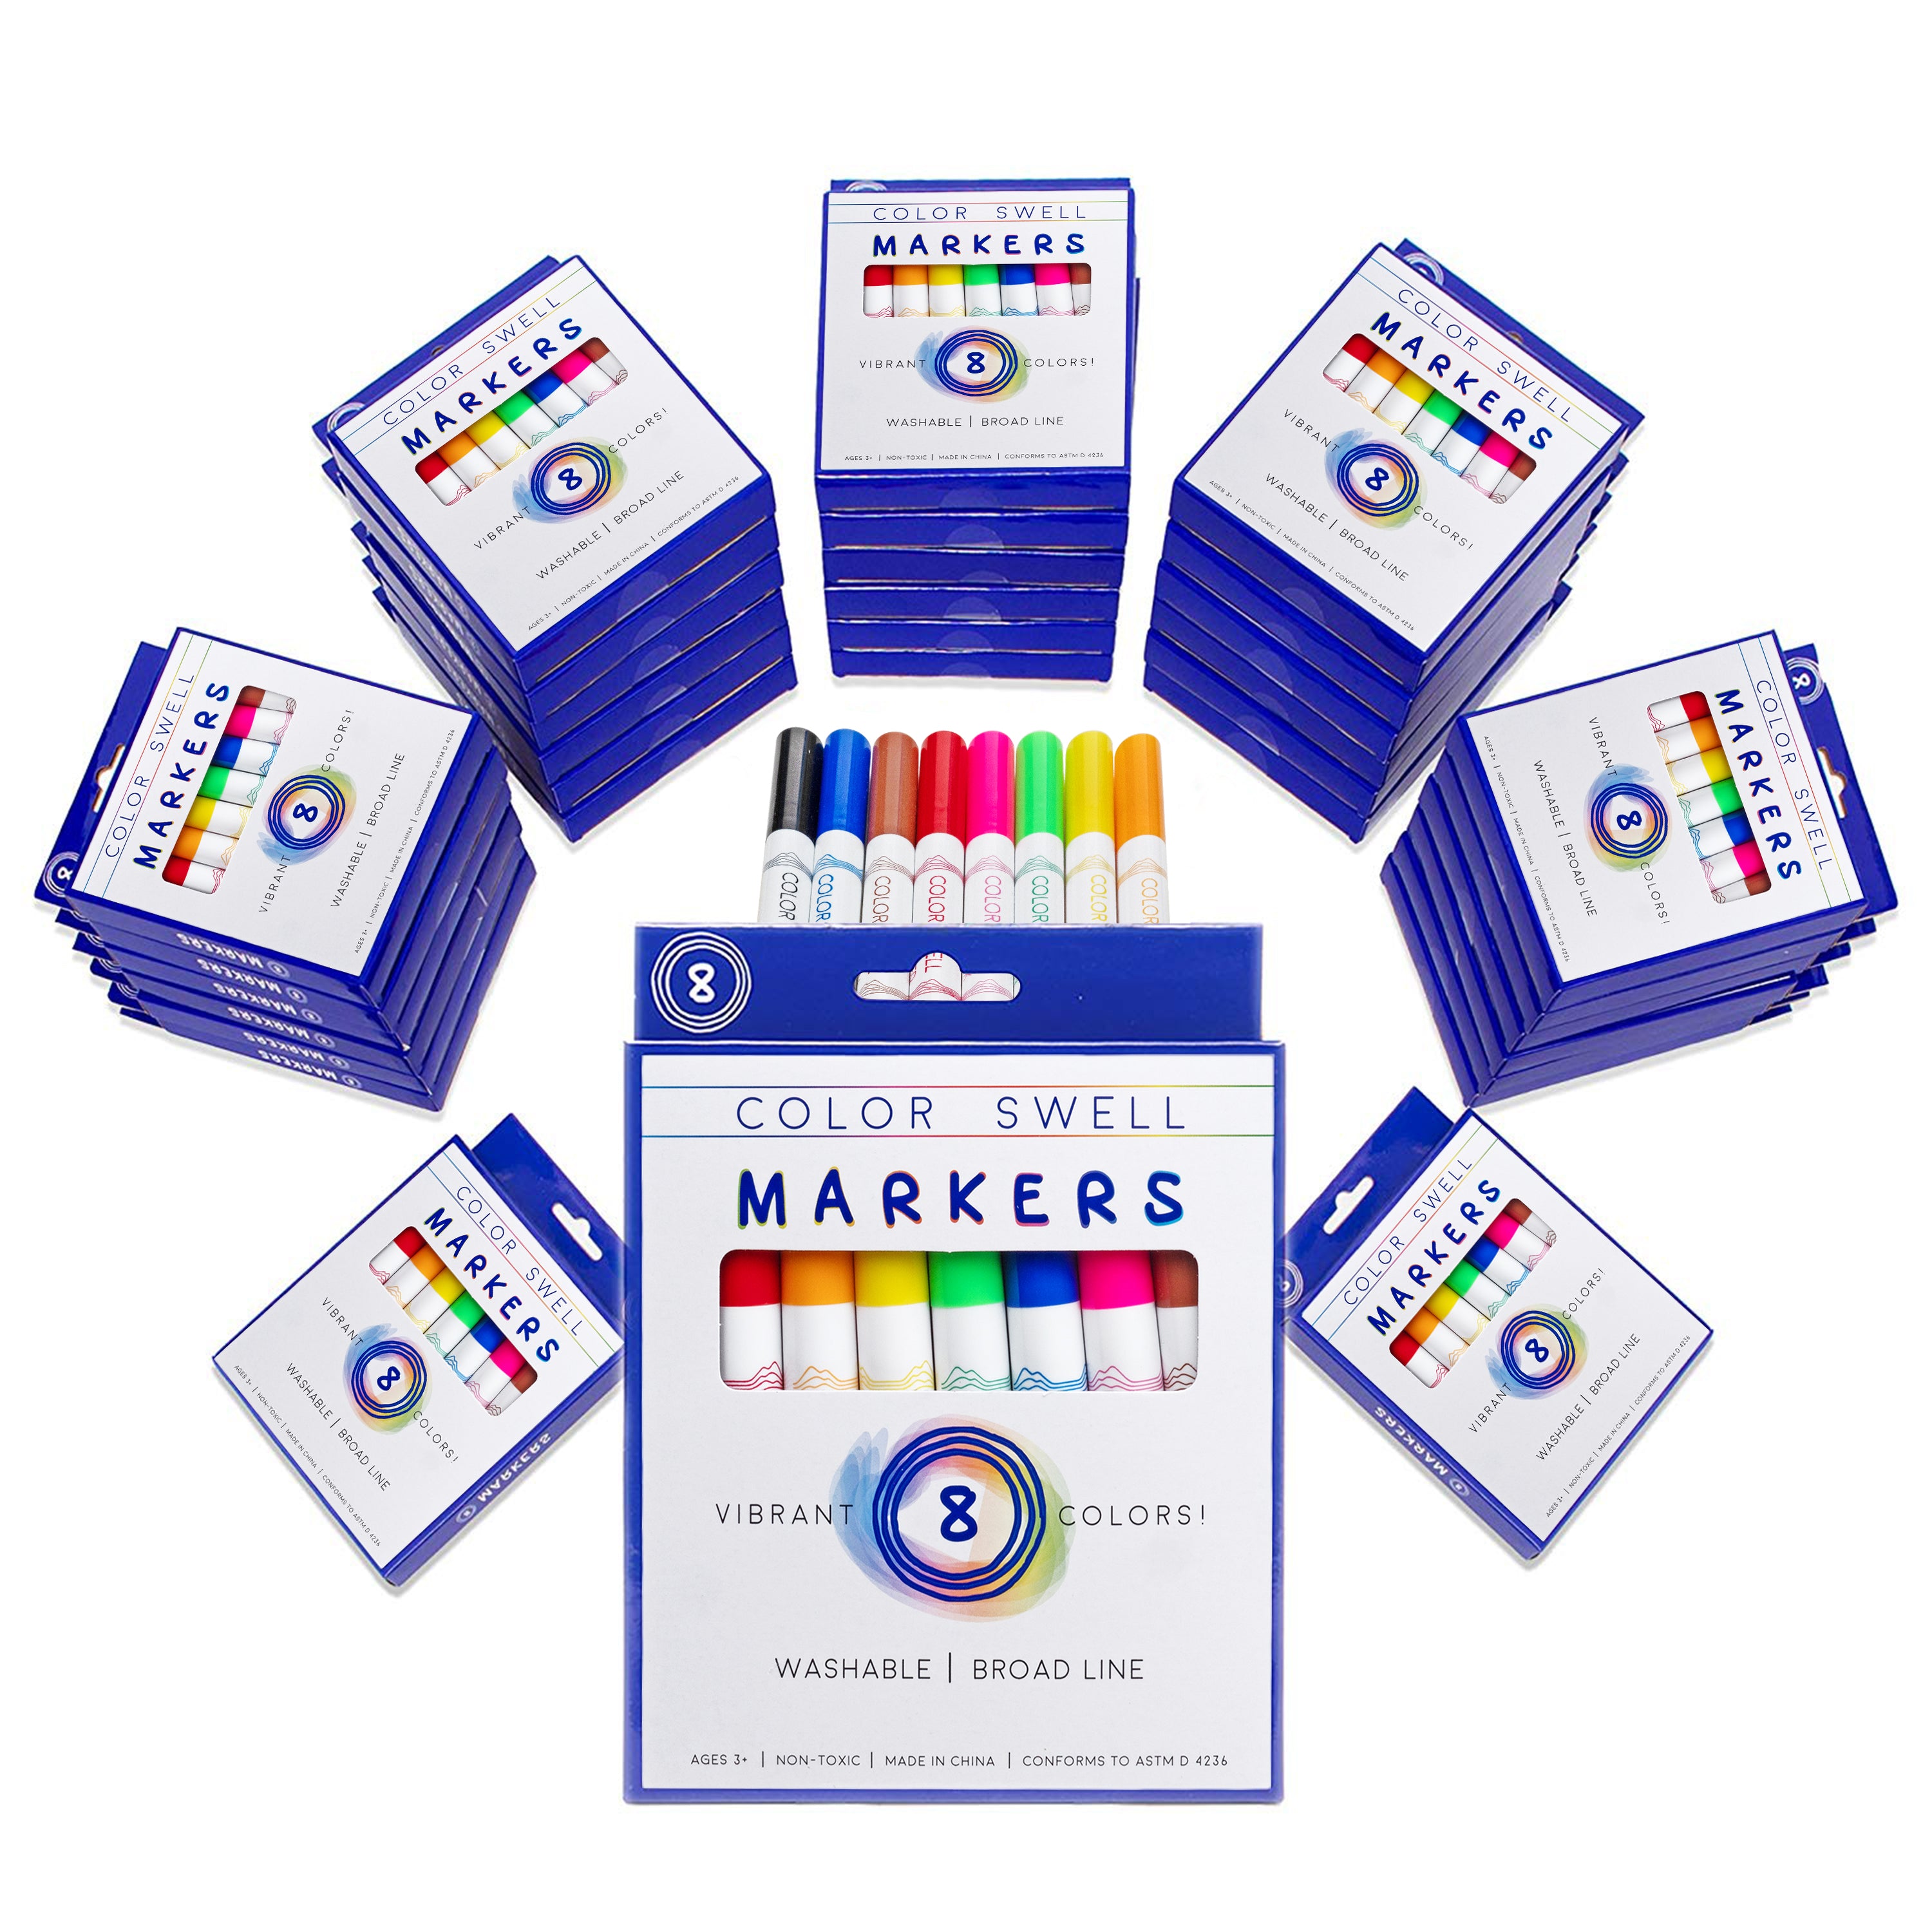 JOT Markers Double-Sided - Broadline and Fineline Sides - 8 Count per Pack  (2 Pack)